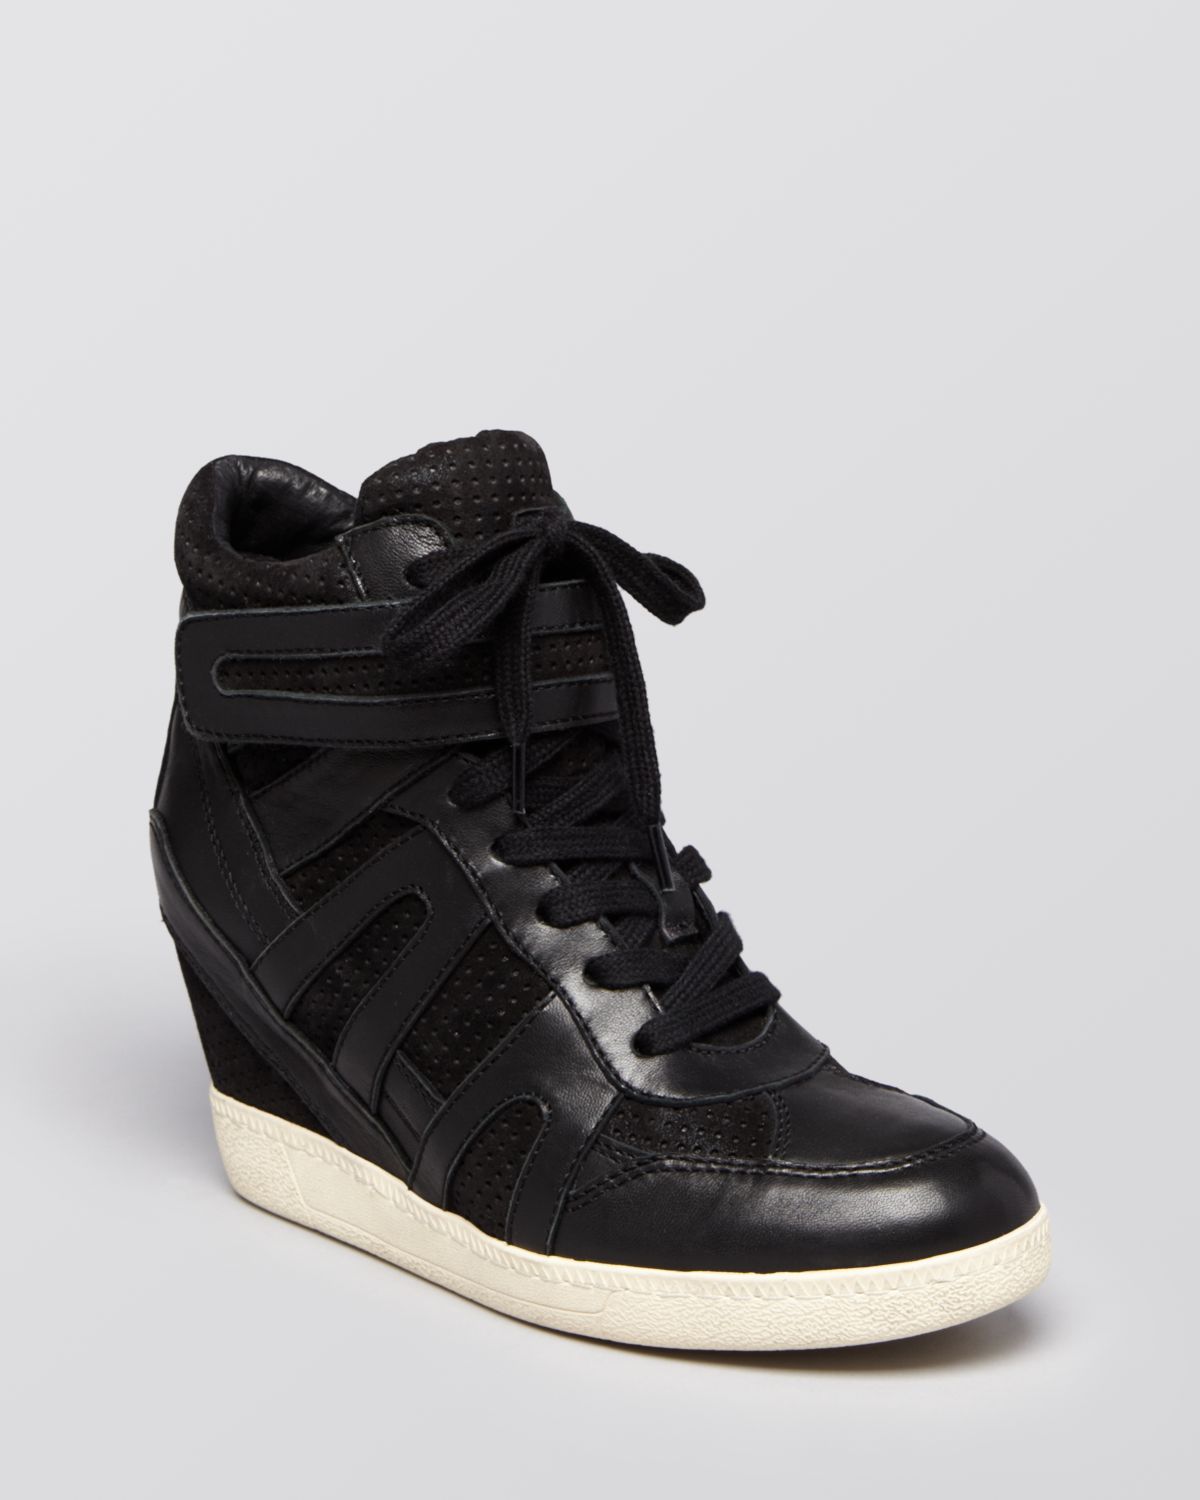 Ash Lace Up Wedge Sneakers Beck Bis in Black | Lyst